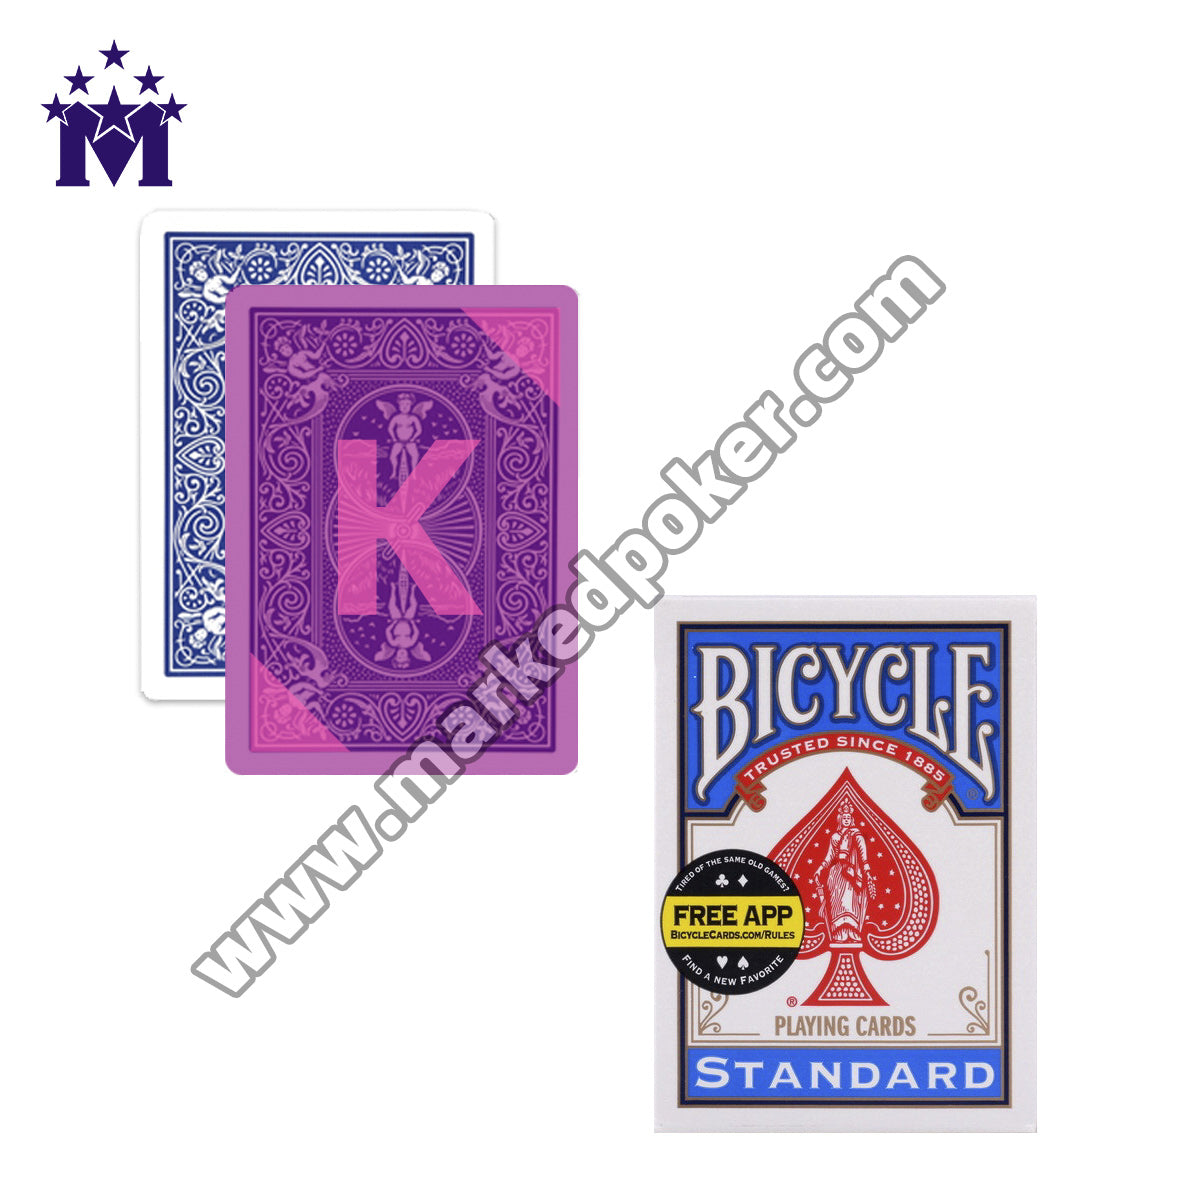 Bicycle Standard Infrared Contact Lenses Marked Cards